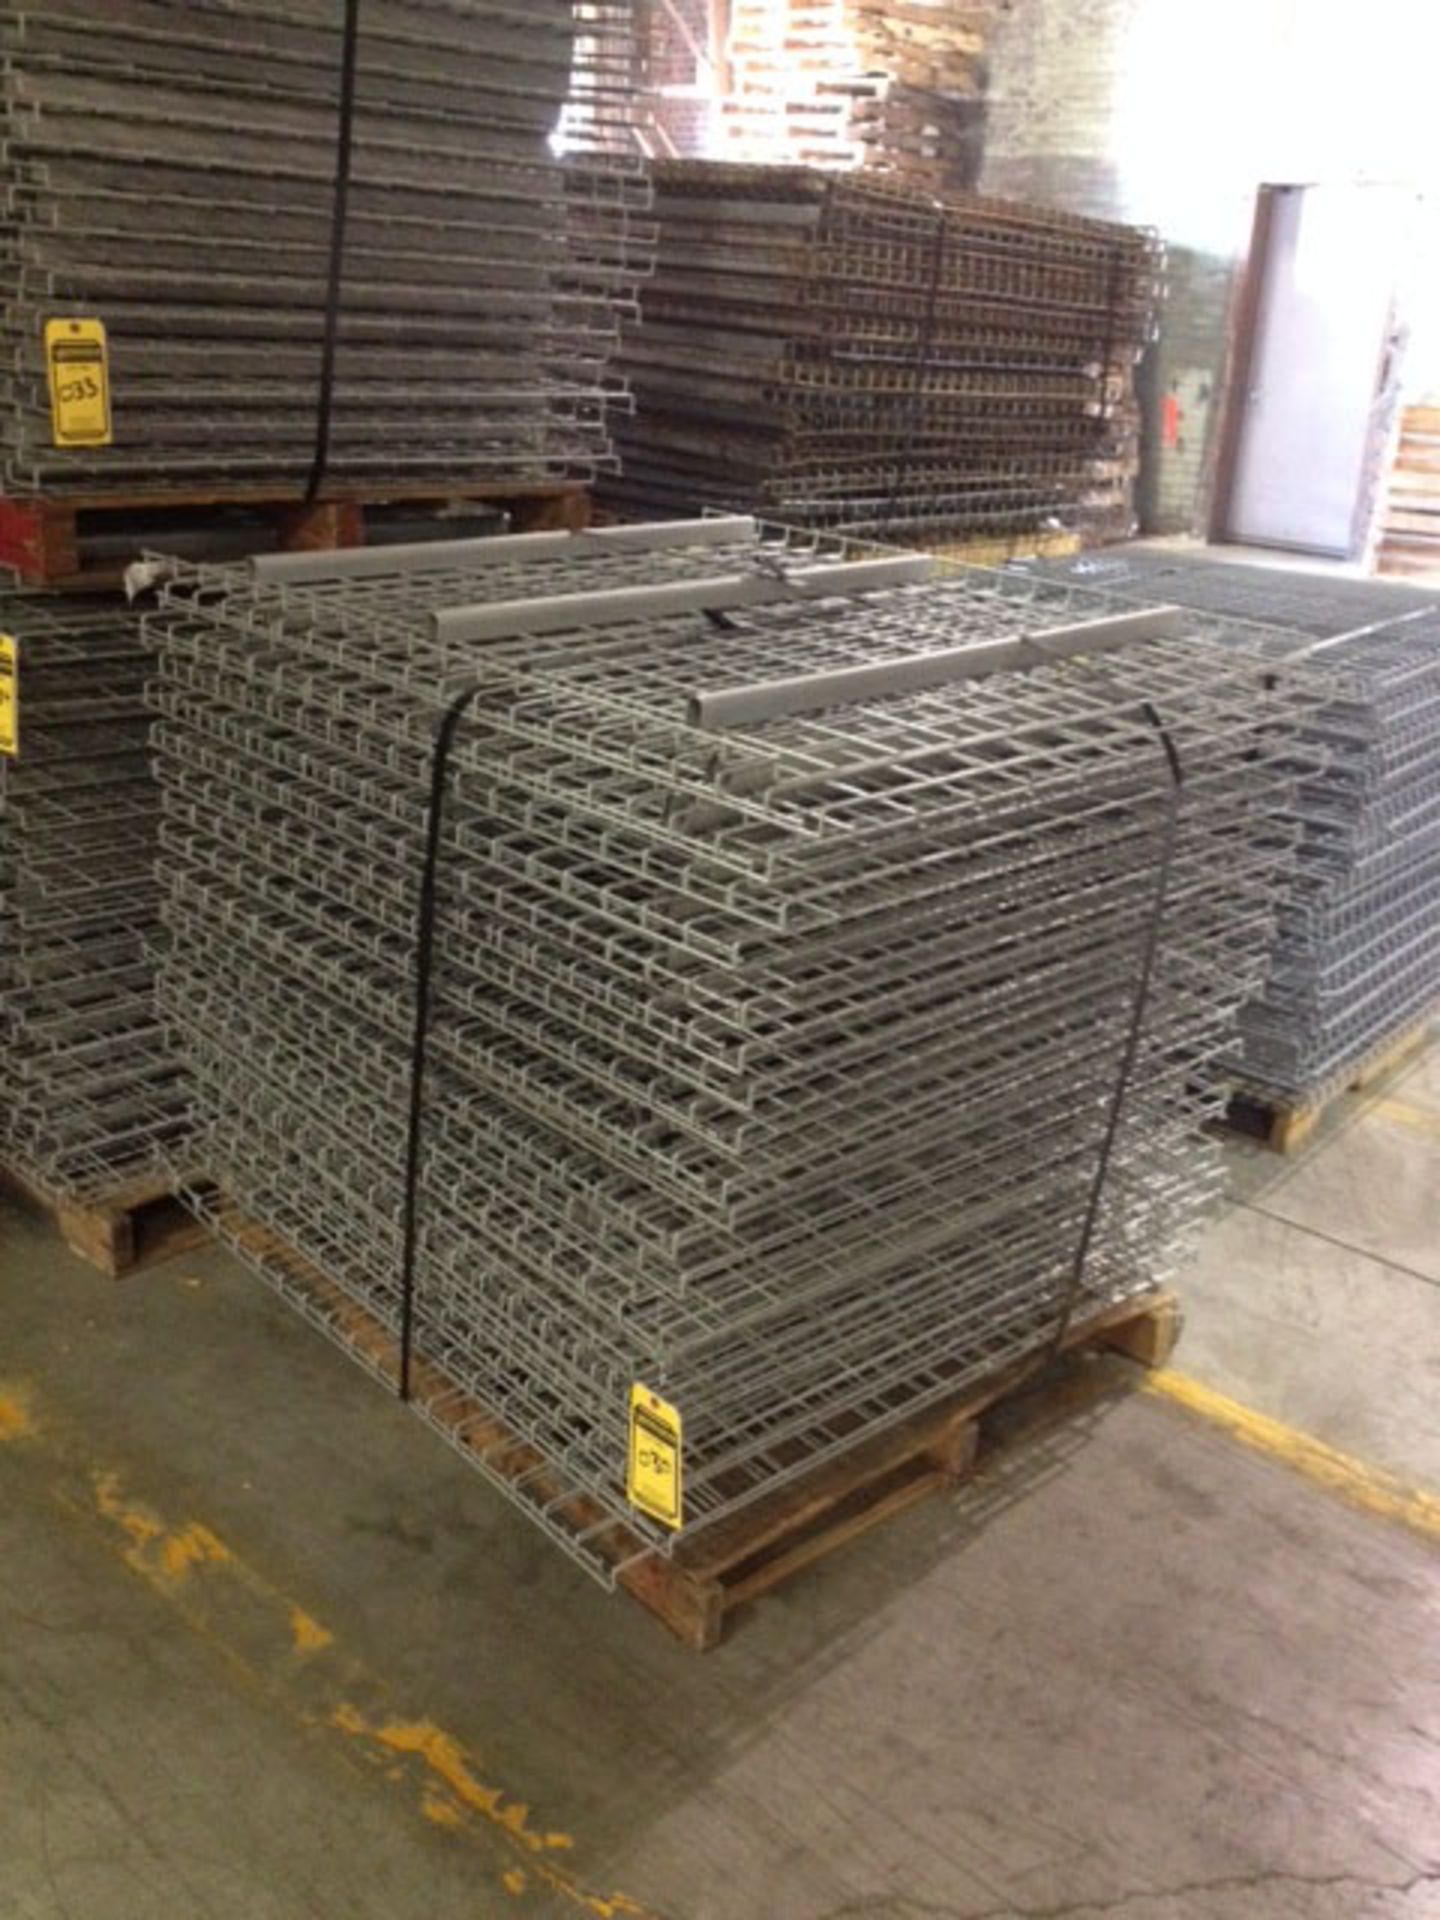 (40) WIRE MESH DECKS - 42'' X 46''; 3-CHANNEL WATERFALL - 40 PER PALLET  (MARION, OH) - Image 2 of 2